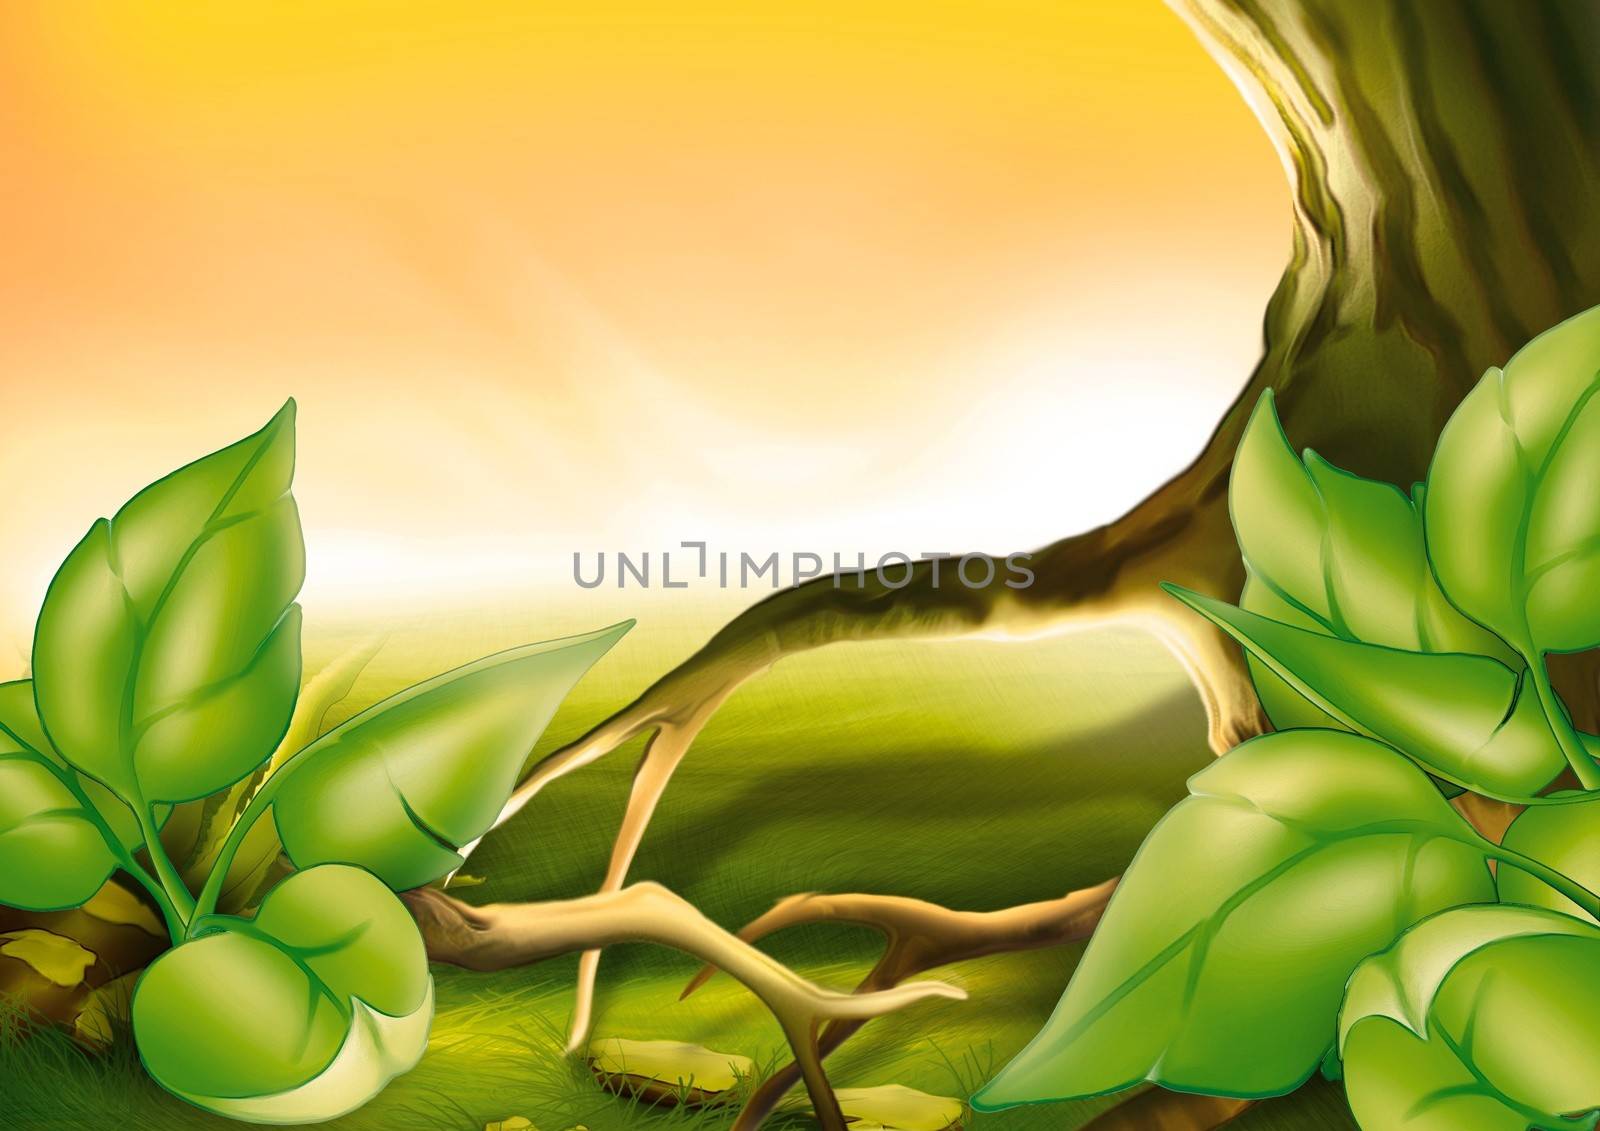 Tree And Green Leafs - Background Illustration